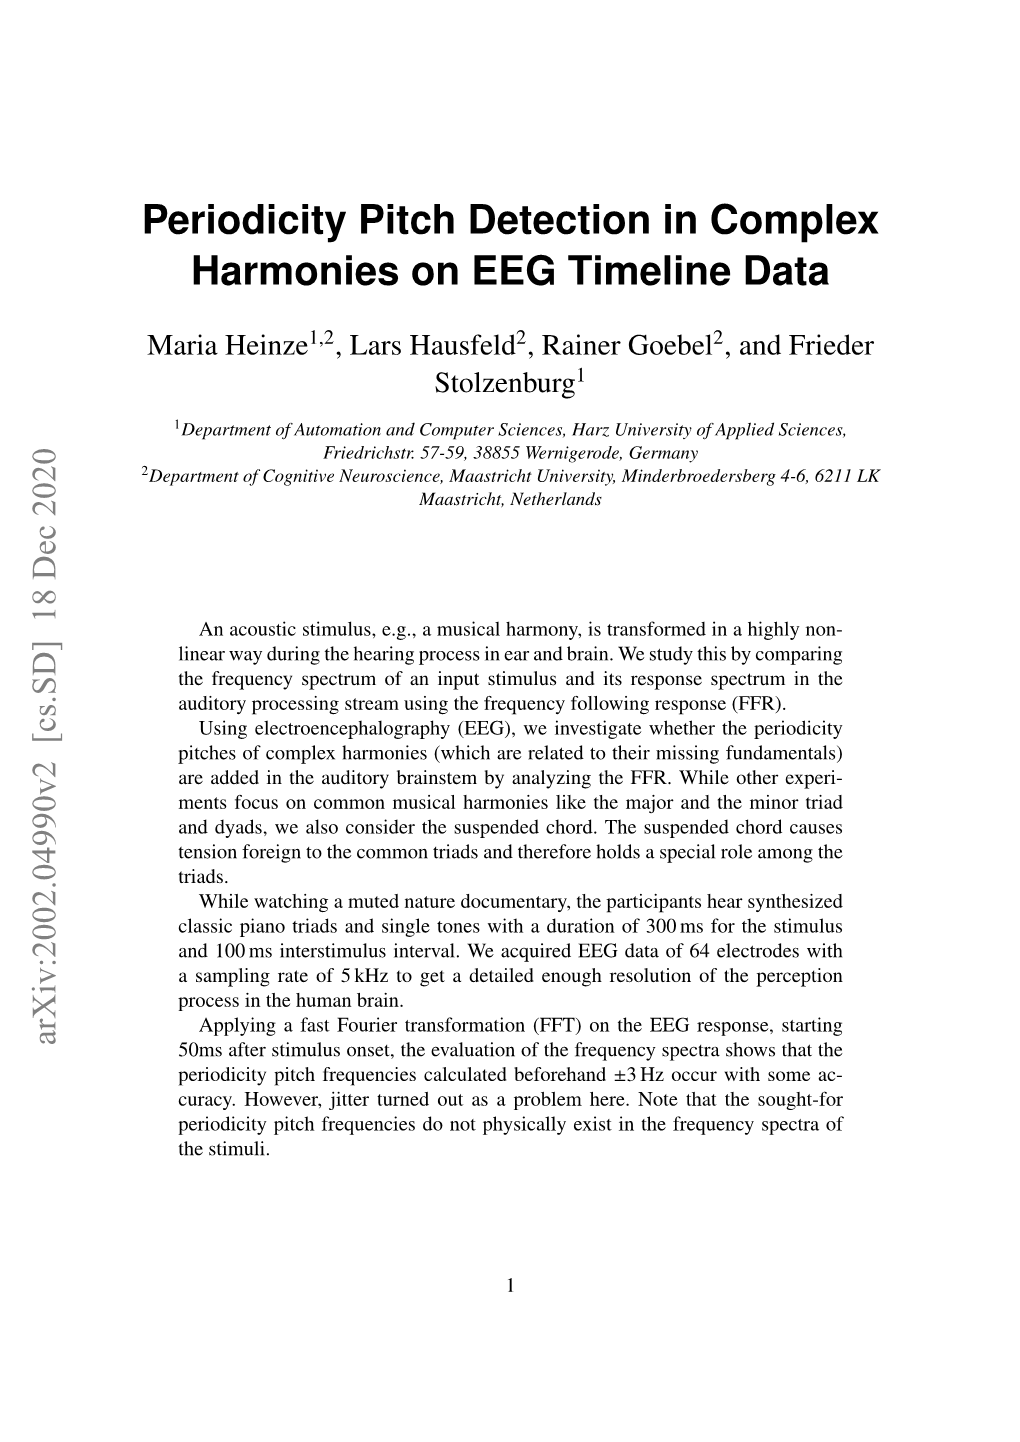 Periodicity Pitch Detection in Complex Harmonies on EEG Timeline Data